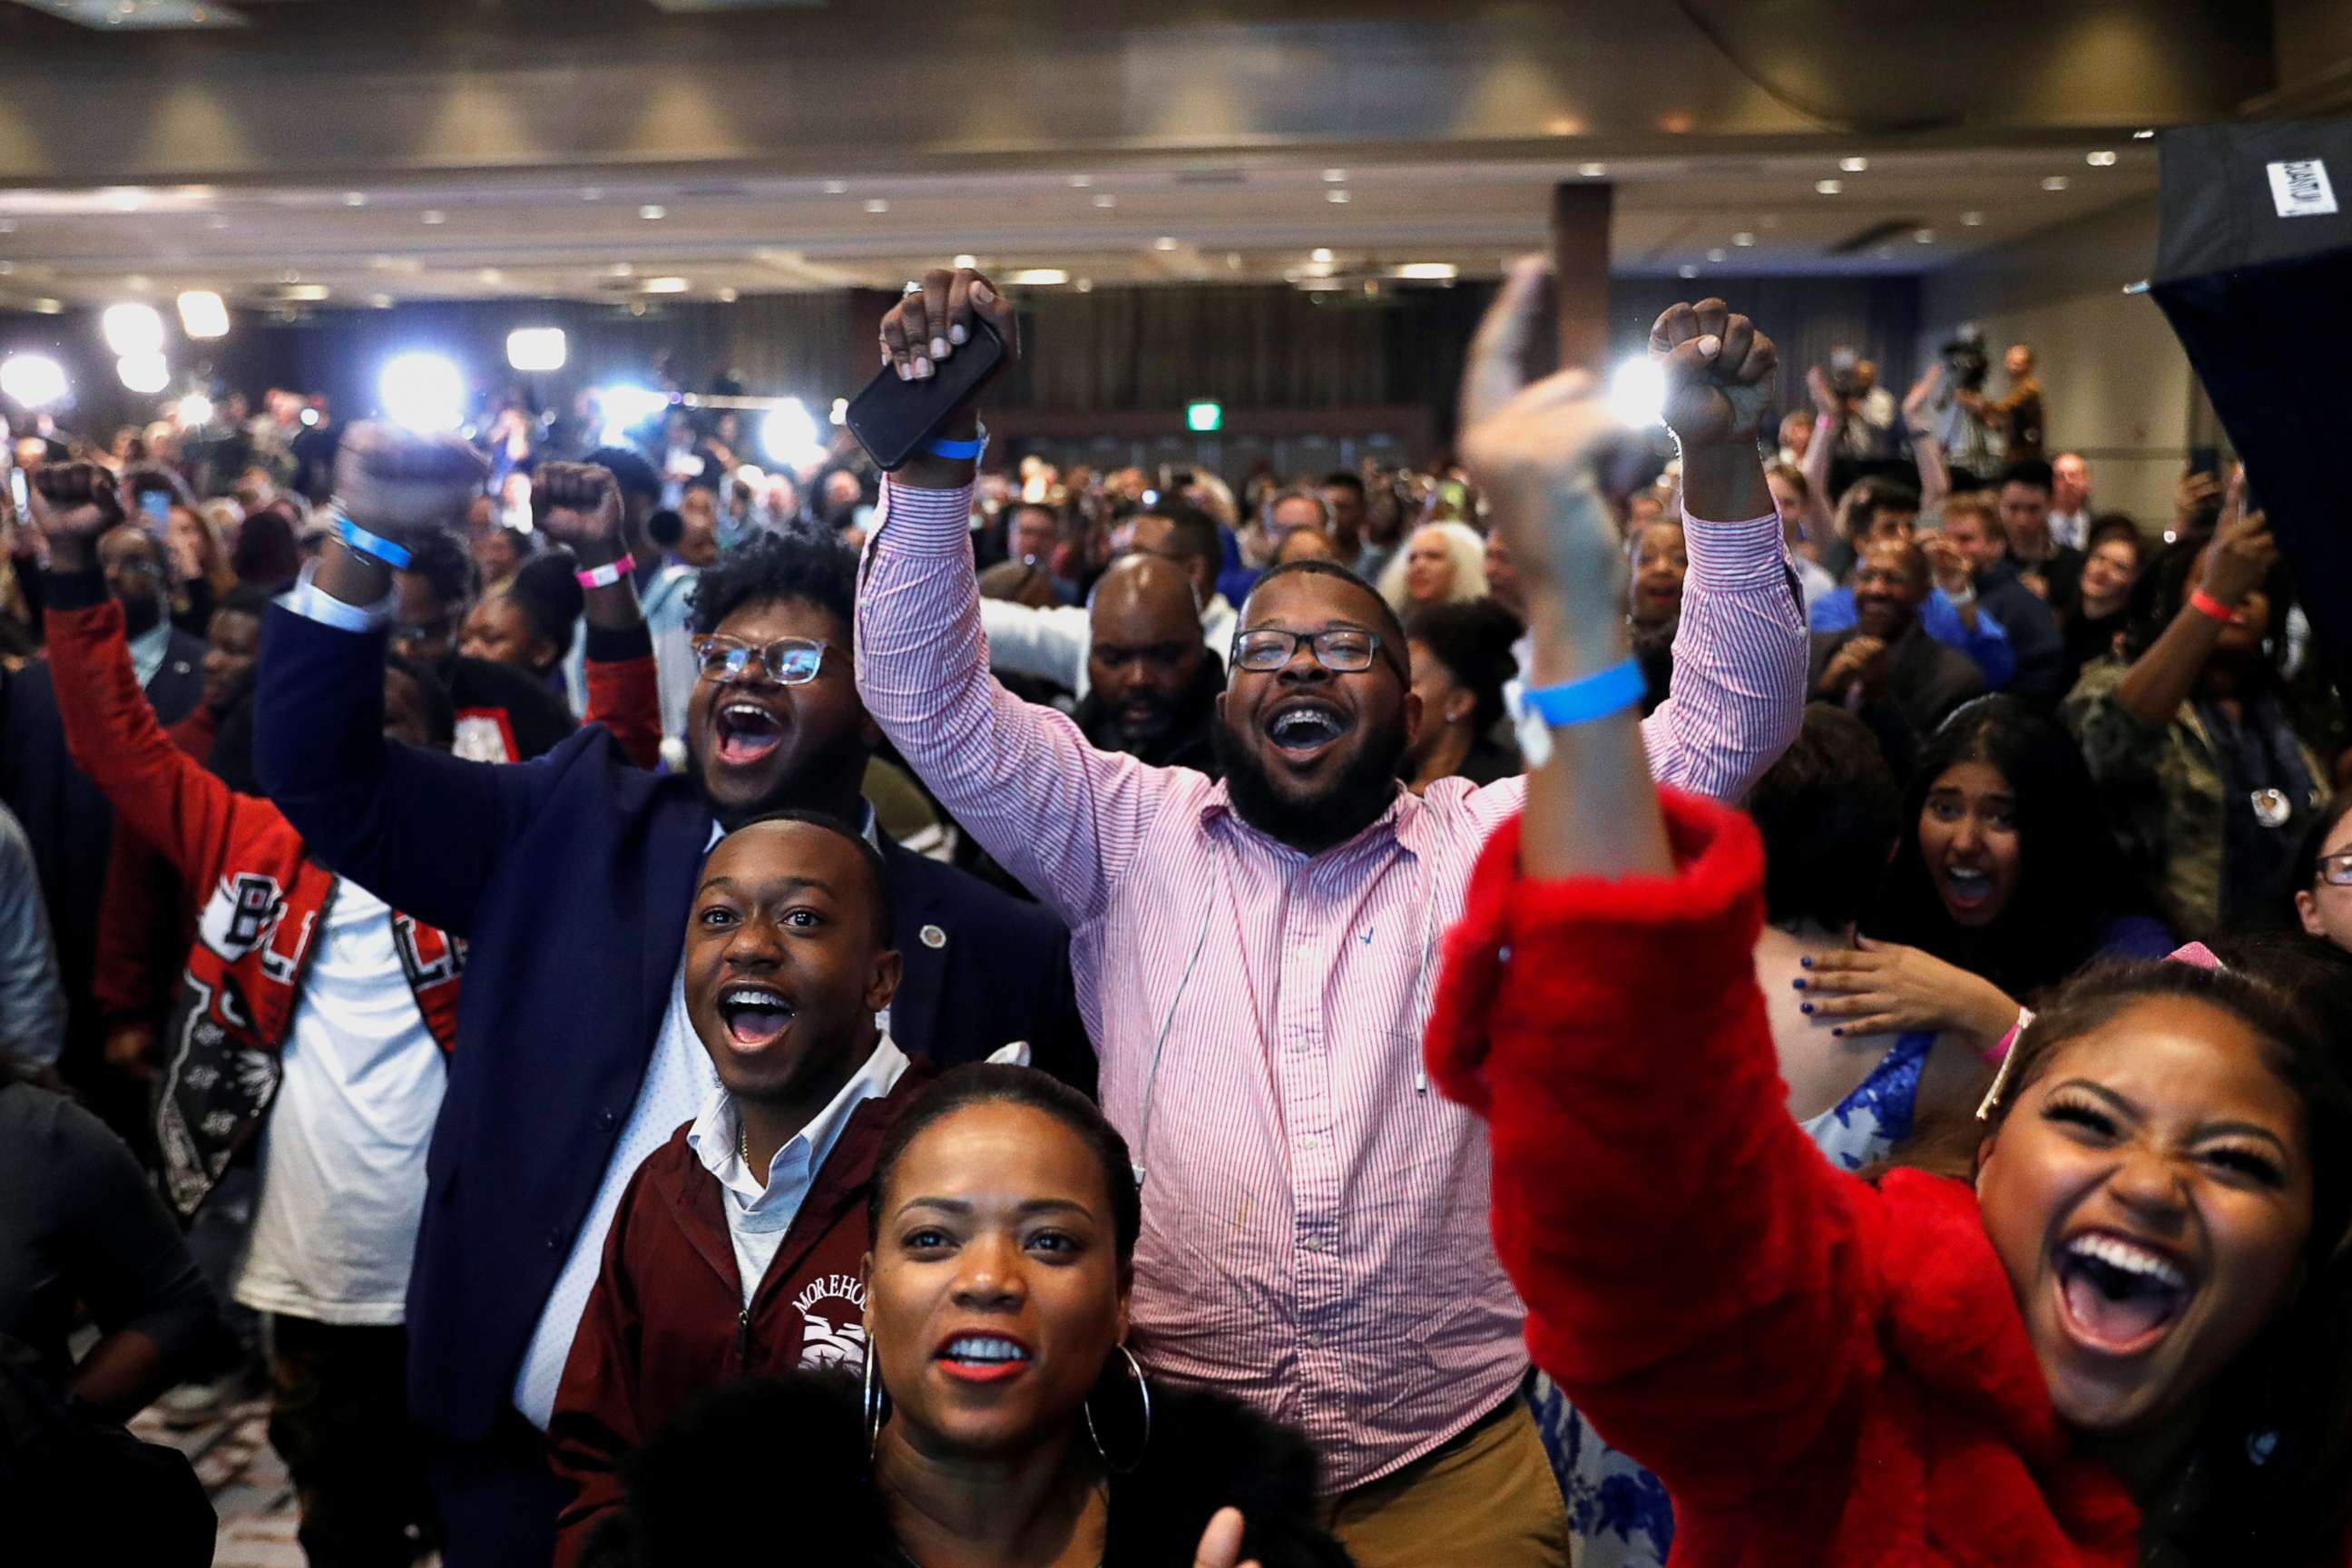 PHOTO: Supporters react after the Abrams campaign announced they were closing the gap during a midterm election night party for Georgia Democratic gubernatorial nominee Stacey Abrams in Atlanta, Nov. 6, 2018.